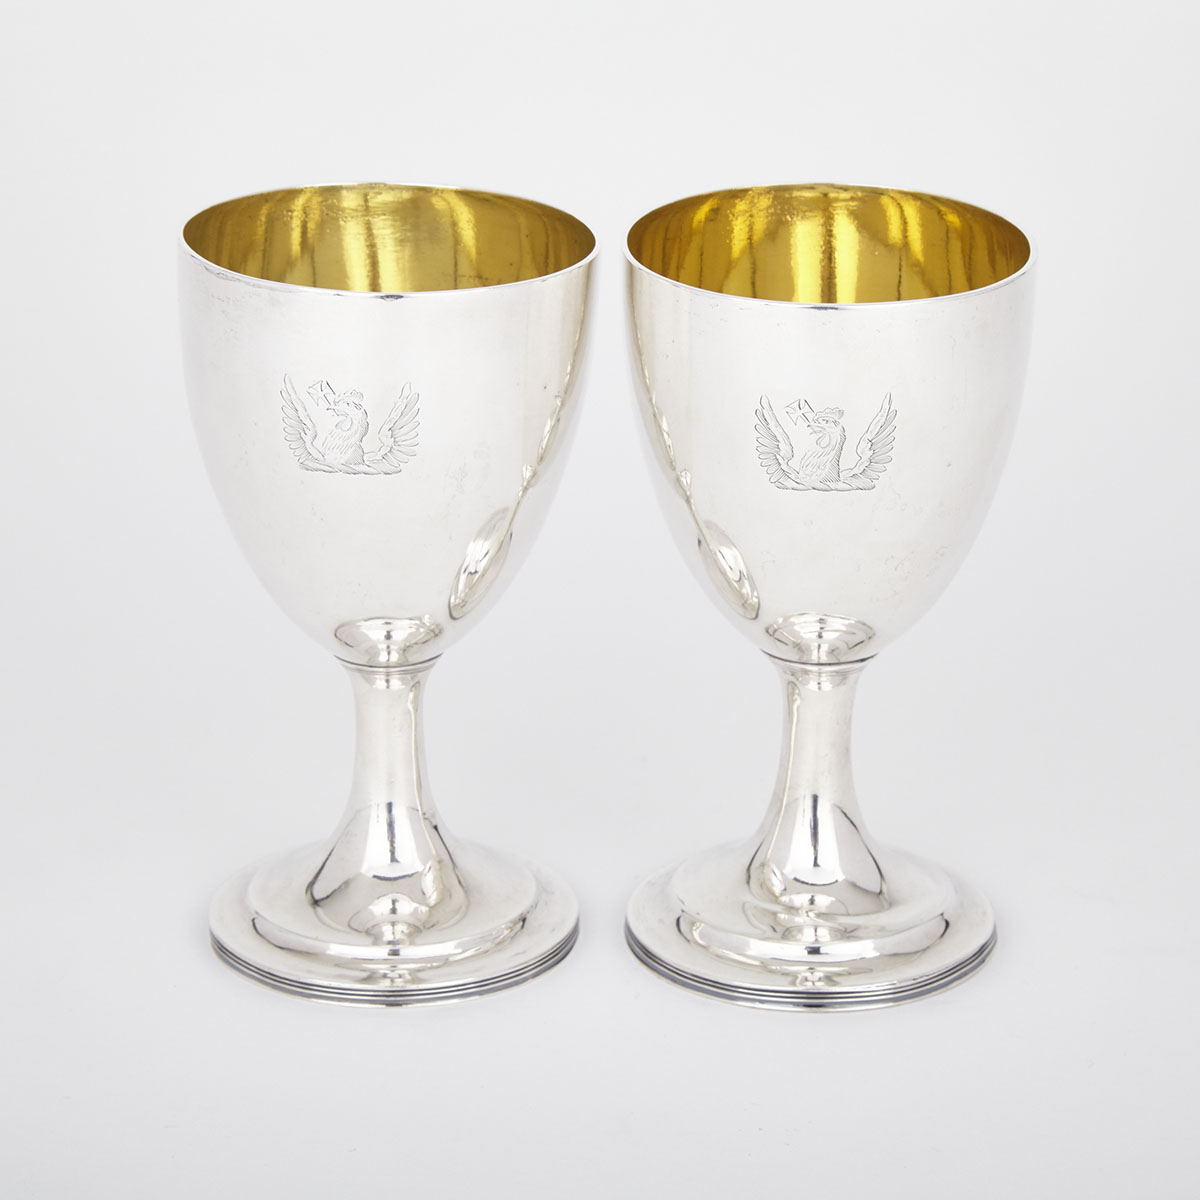 Pair of American Silver Goblets, Isaac Hutton, Albany, N.Y., c.1790-1800